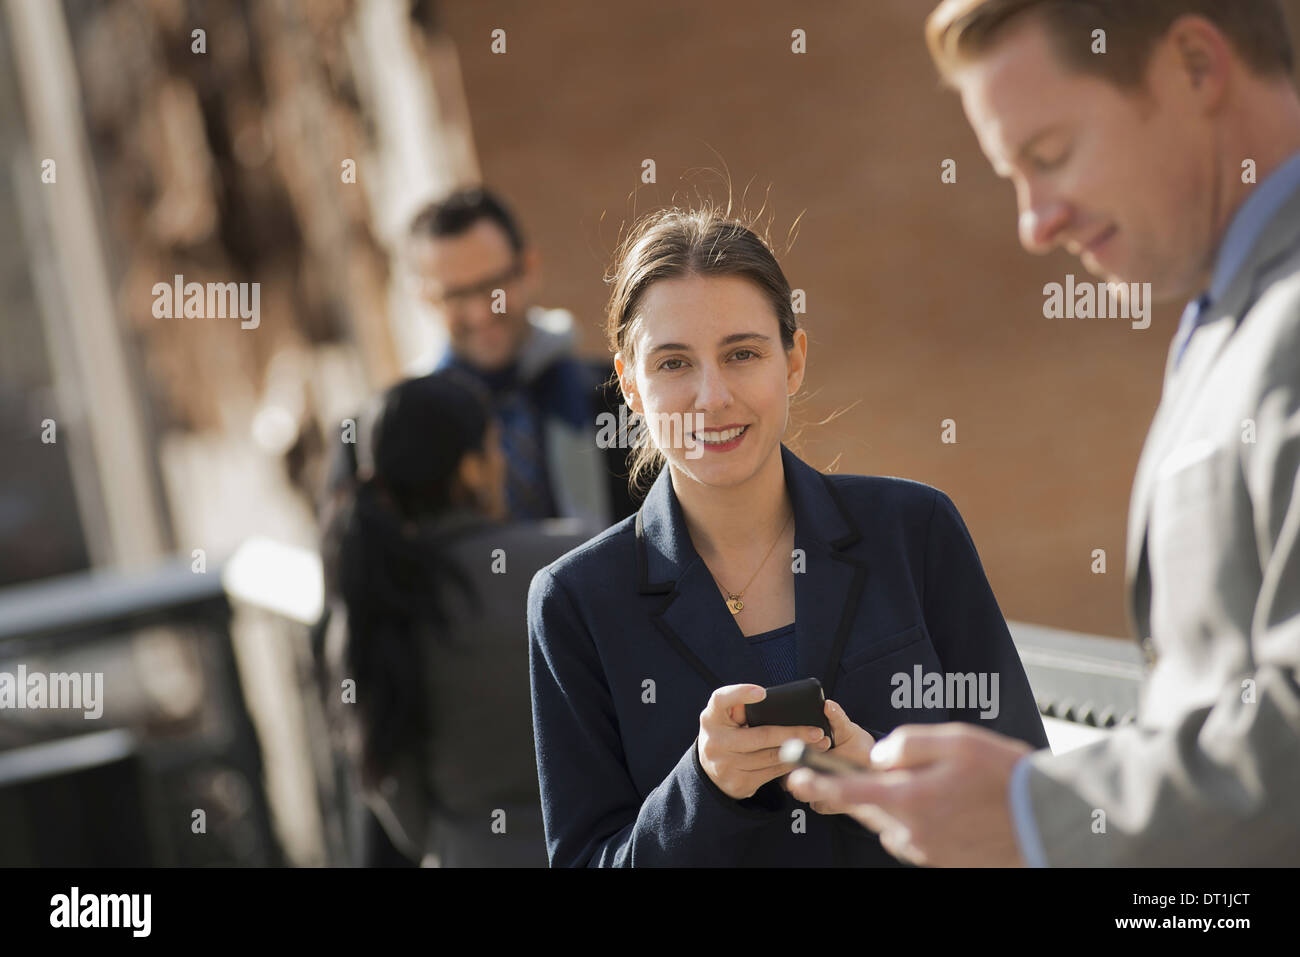 Three people standing on the sidewalk in the city checking their phones Two men and a woman Stock Photo